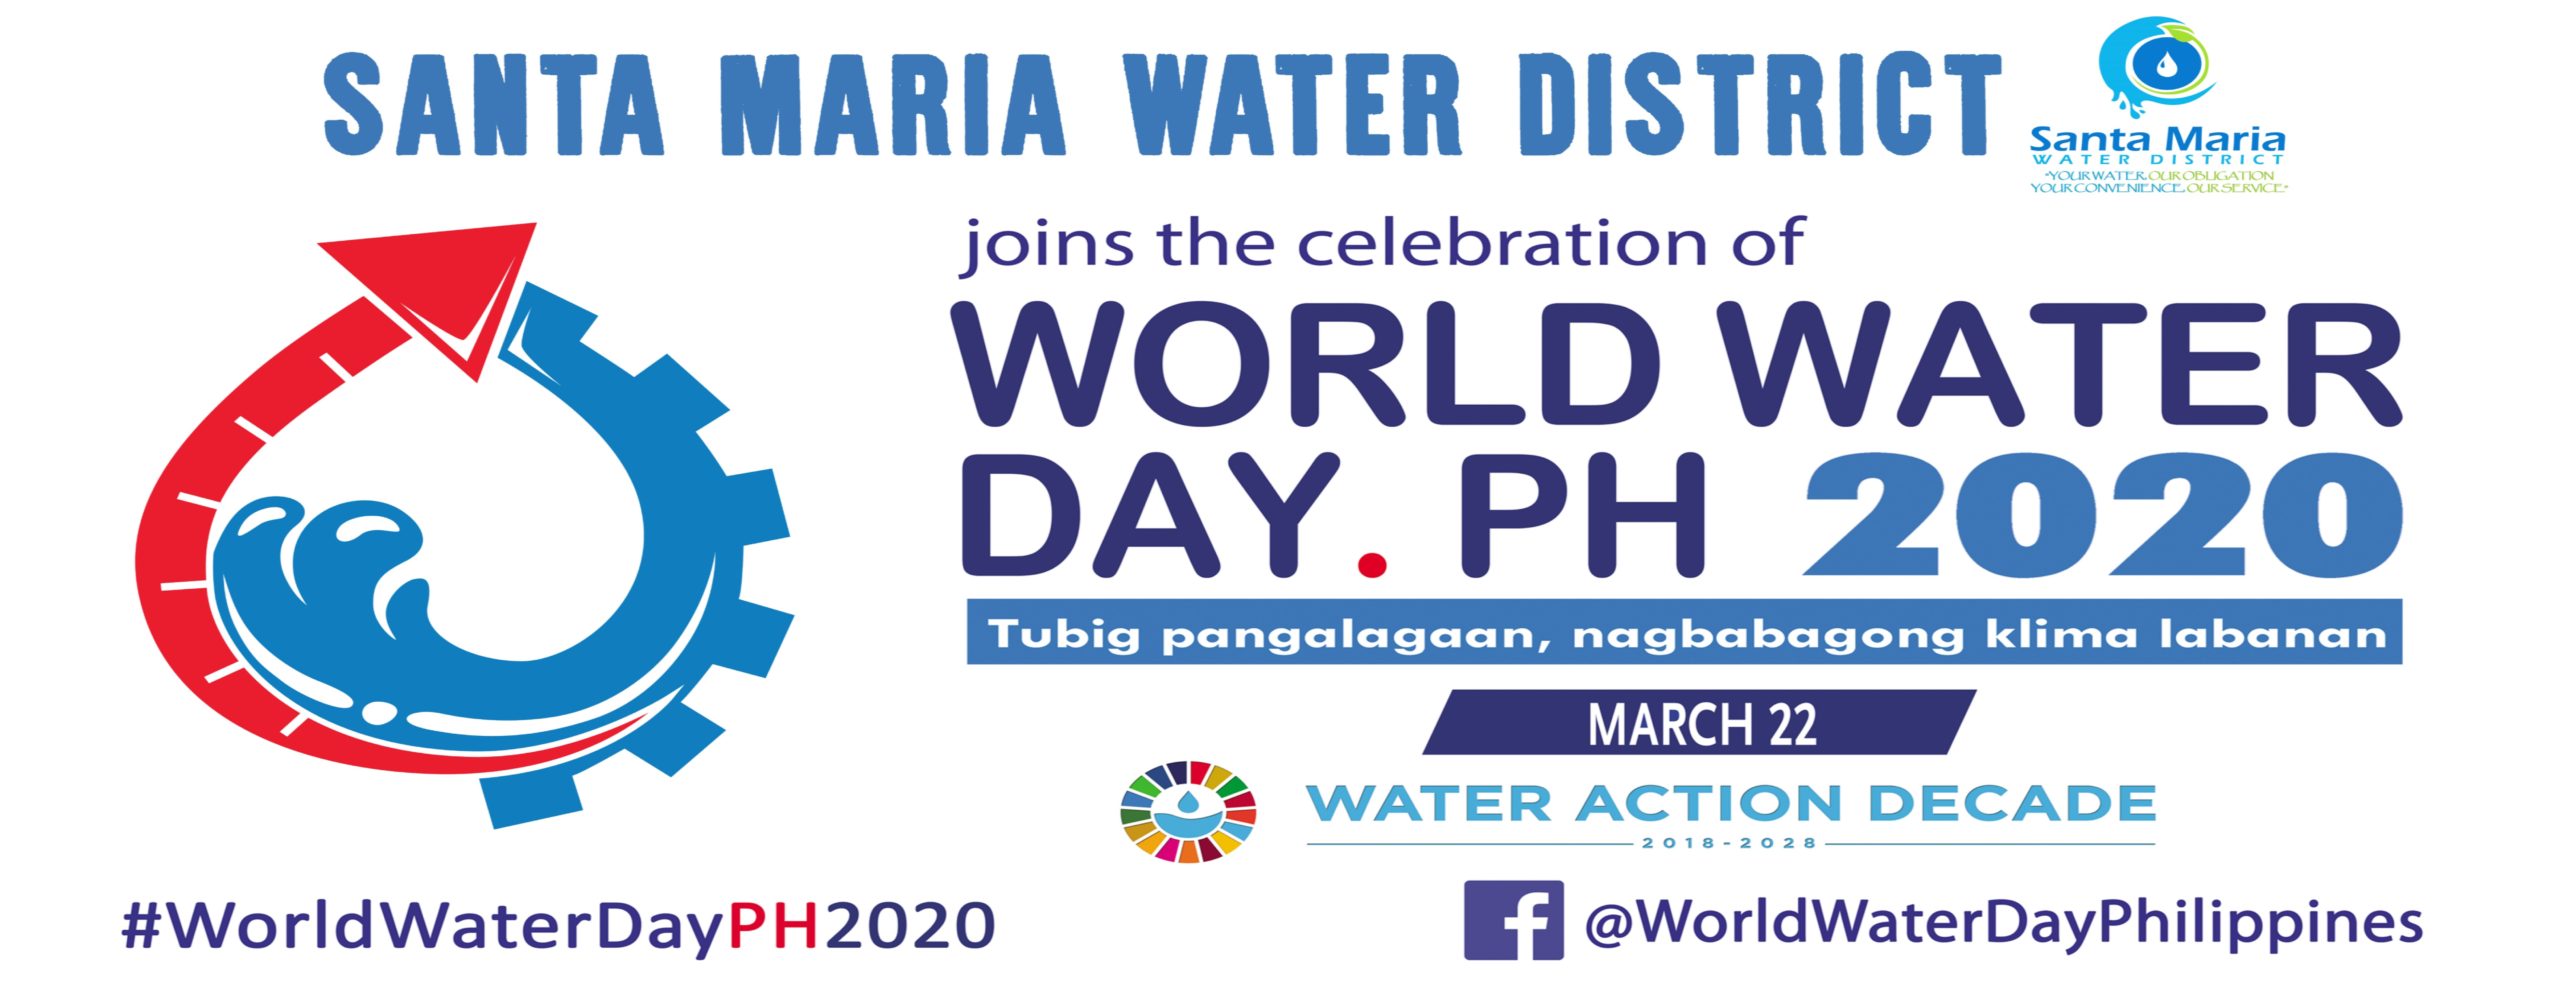 santa-maria-water-district-your-water-our-obligation-your